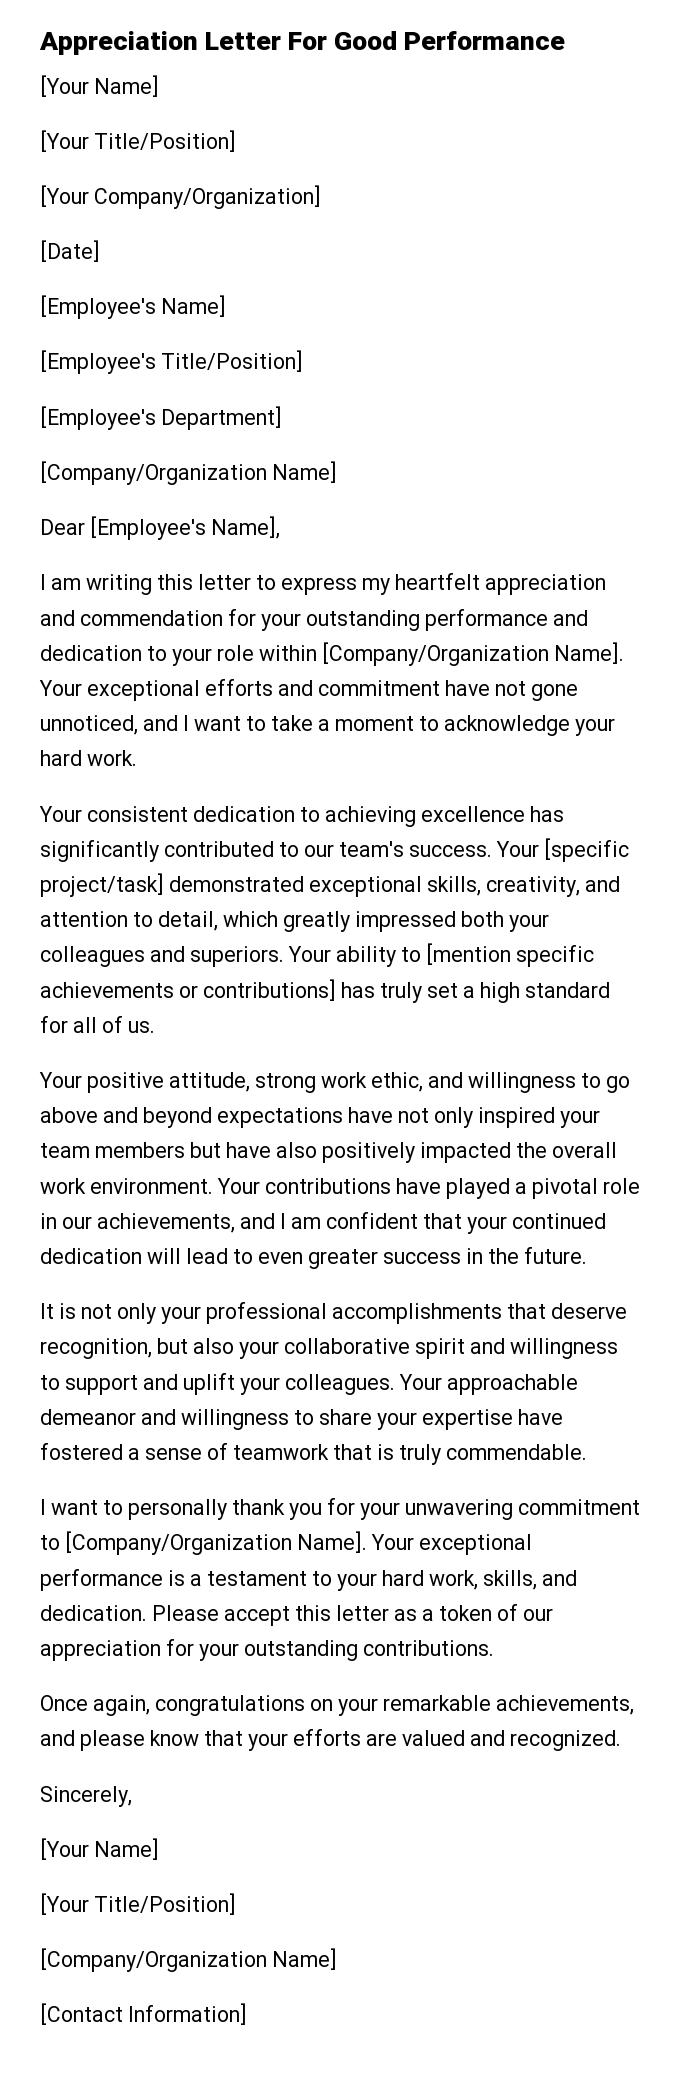 Appreciation Letter For Good Performance